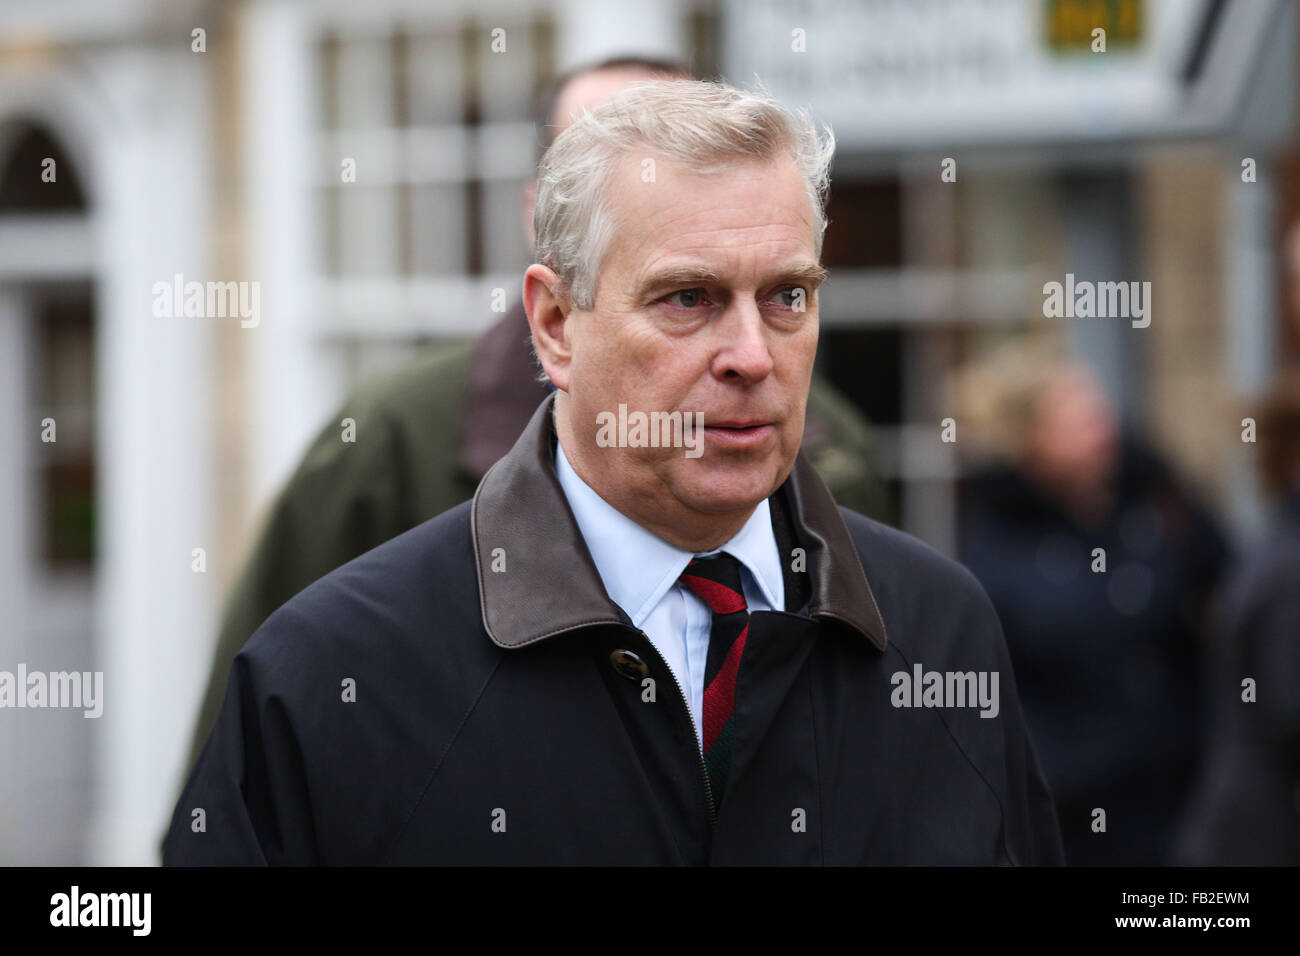 Prince Andrew, The Duke of York, talks to the media in front of Tadcaster Bridge during a visit to the town of Tadcaster in North Yorkshire to see the damage caused by flooding in the last month. The town was heavily affected after the River Wharfe burst it's banks causing the bridge to partially collapse. Credit:  Ian Hinchliffe/Alamy Live News Stock Photo